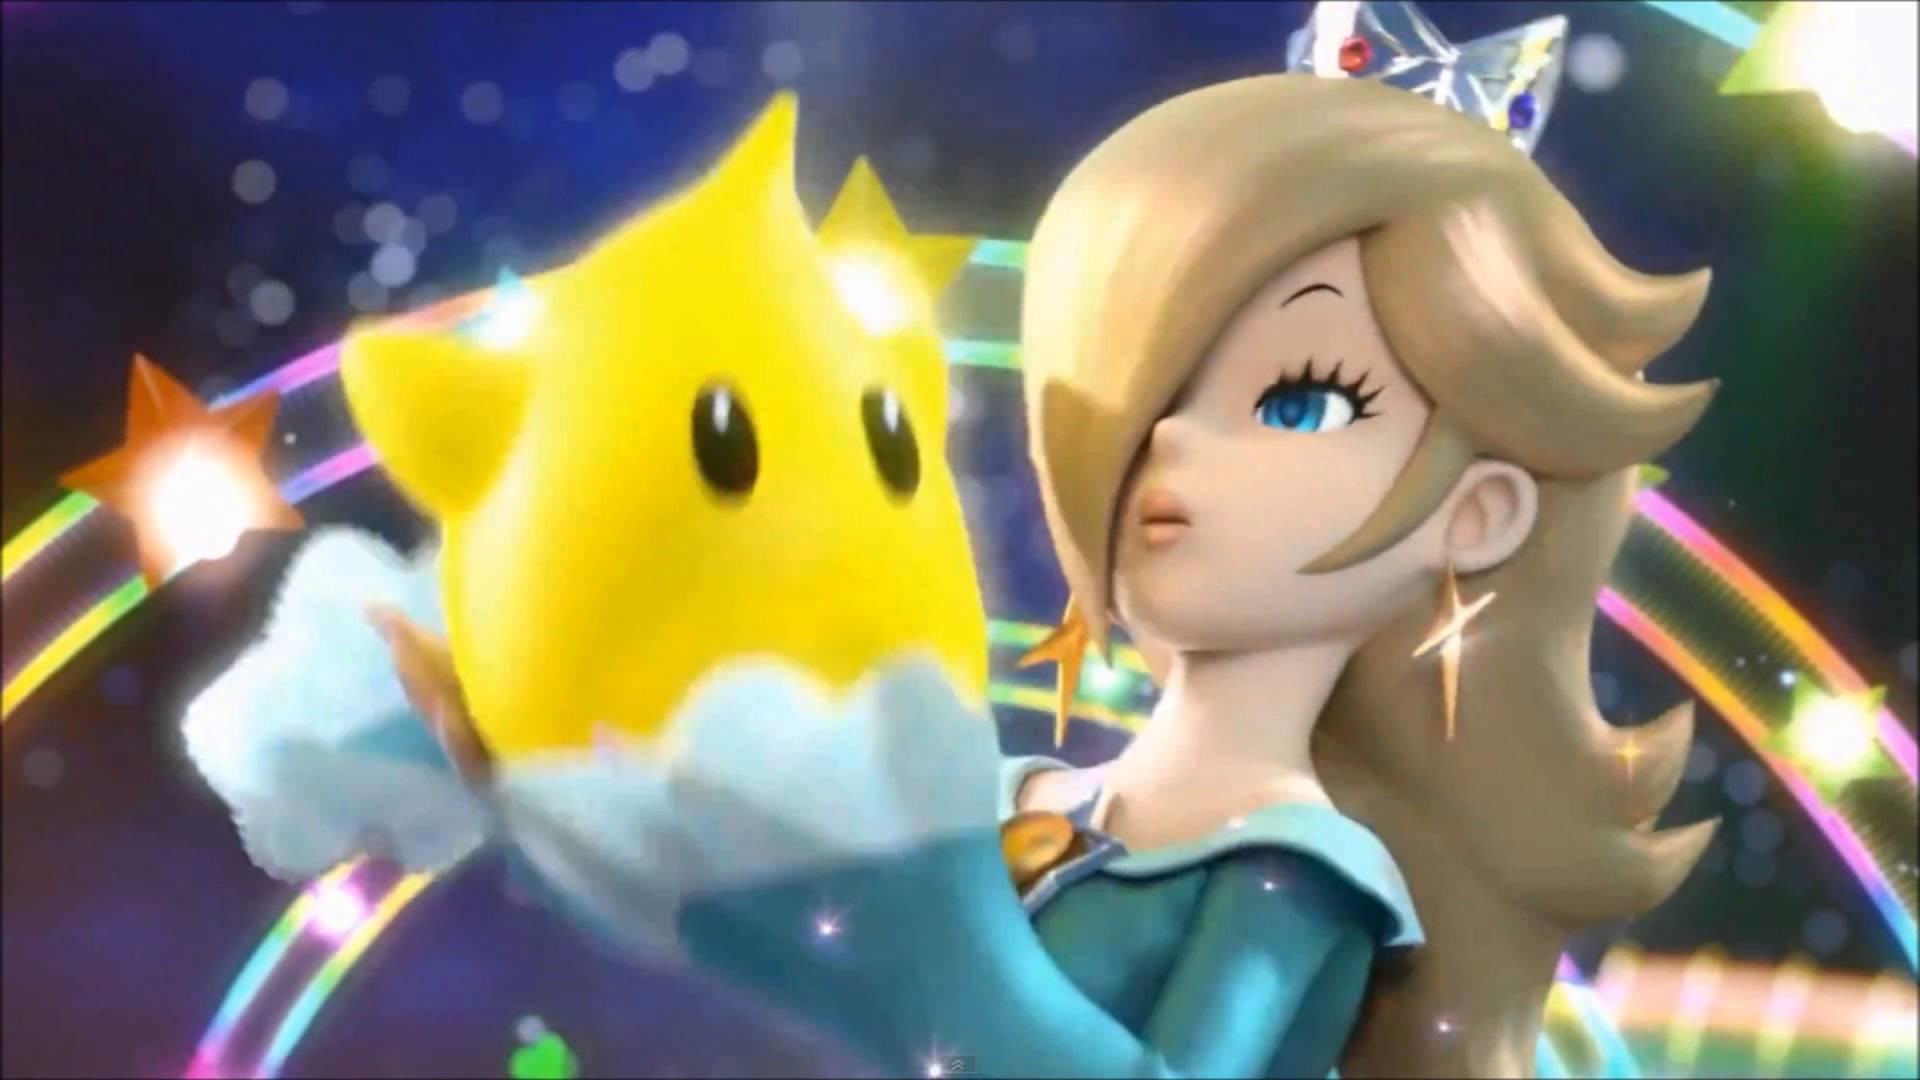 Thoughts on Rosalina Smash Wii U / 3DS Reveal